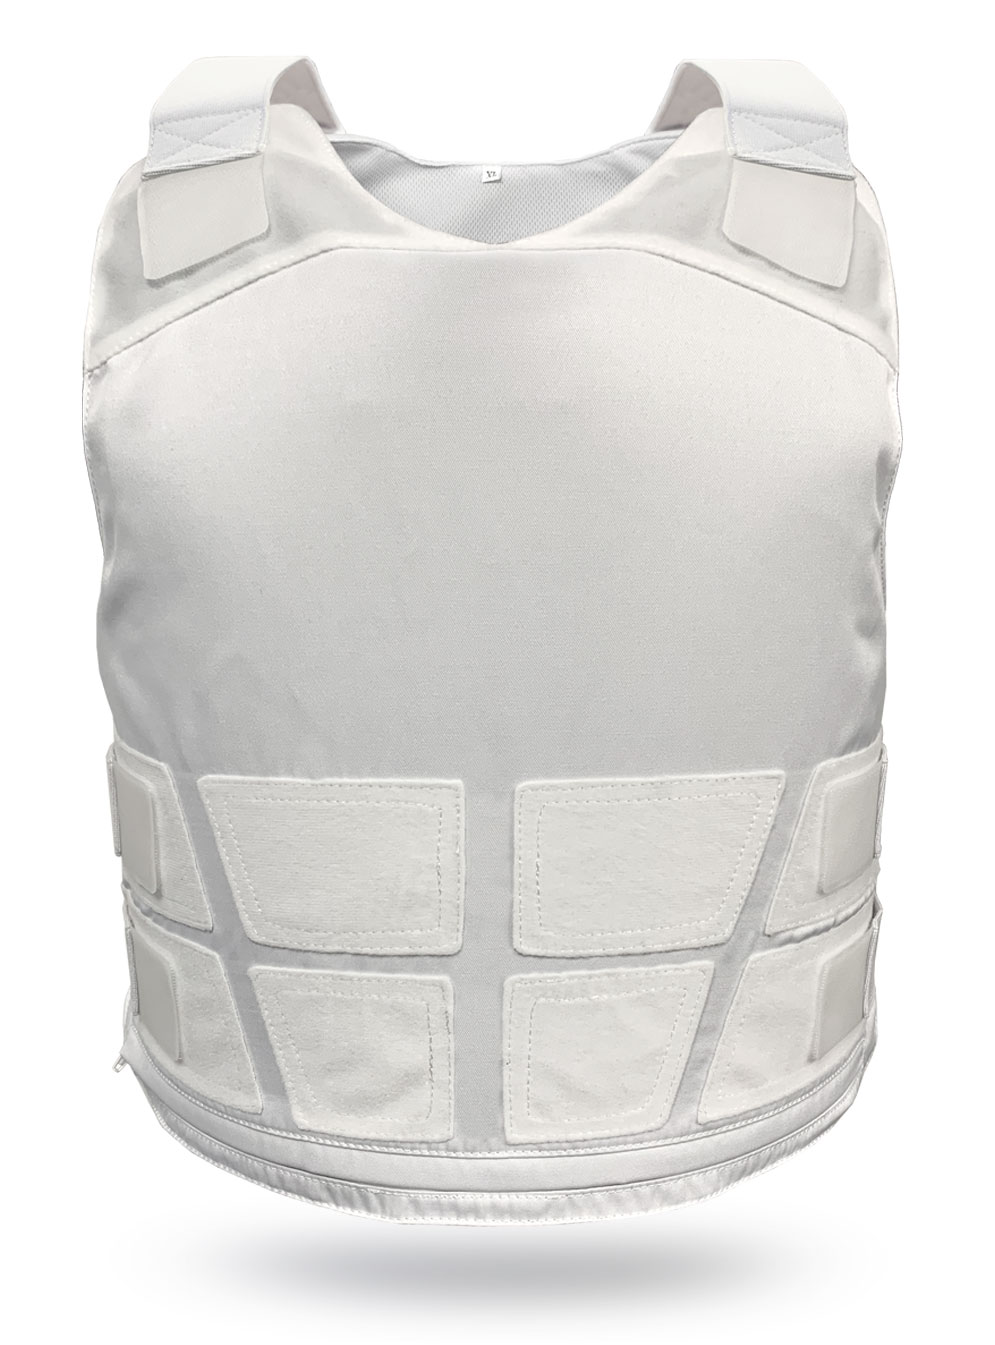 Stab Resistant Body Armour